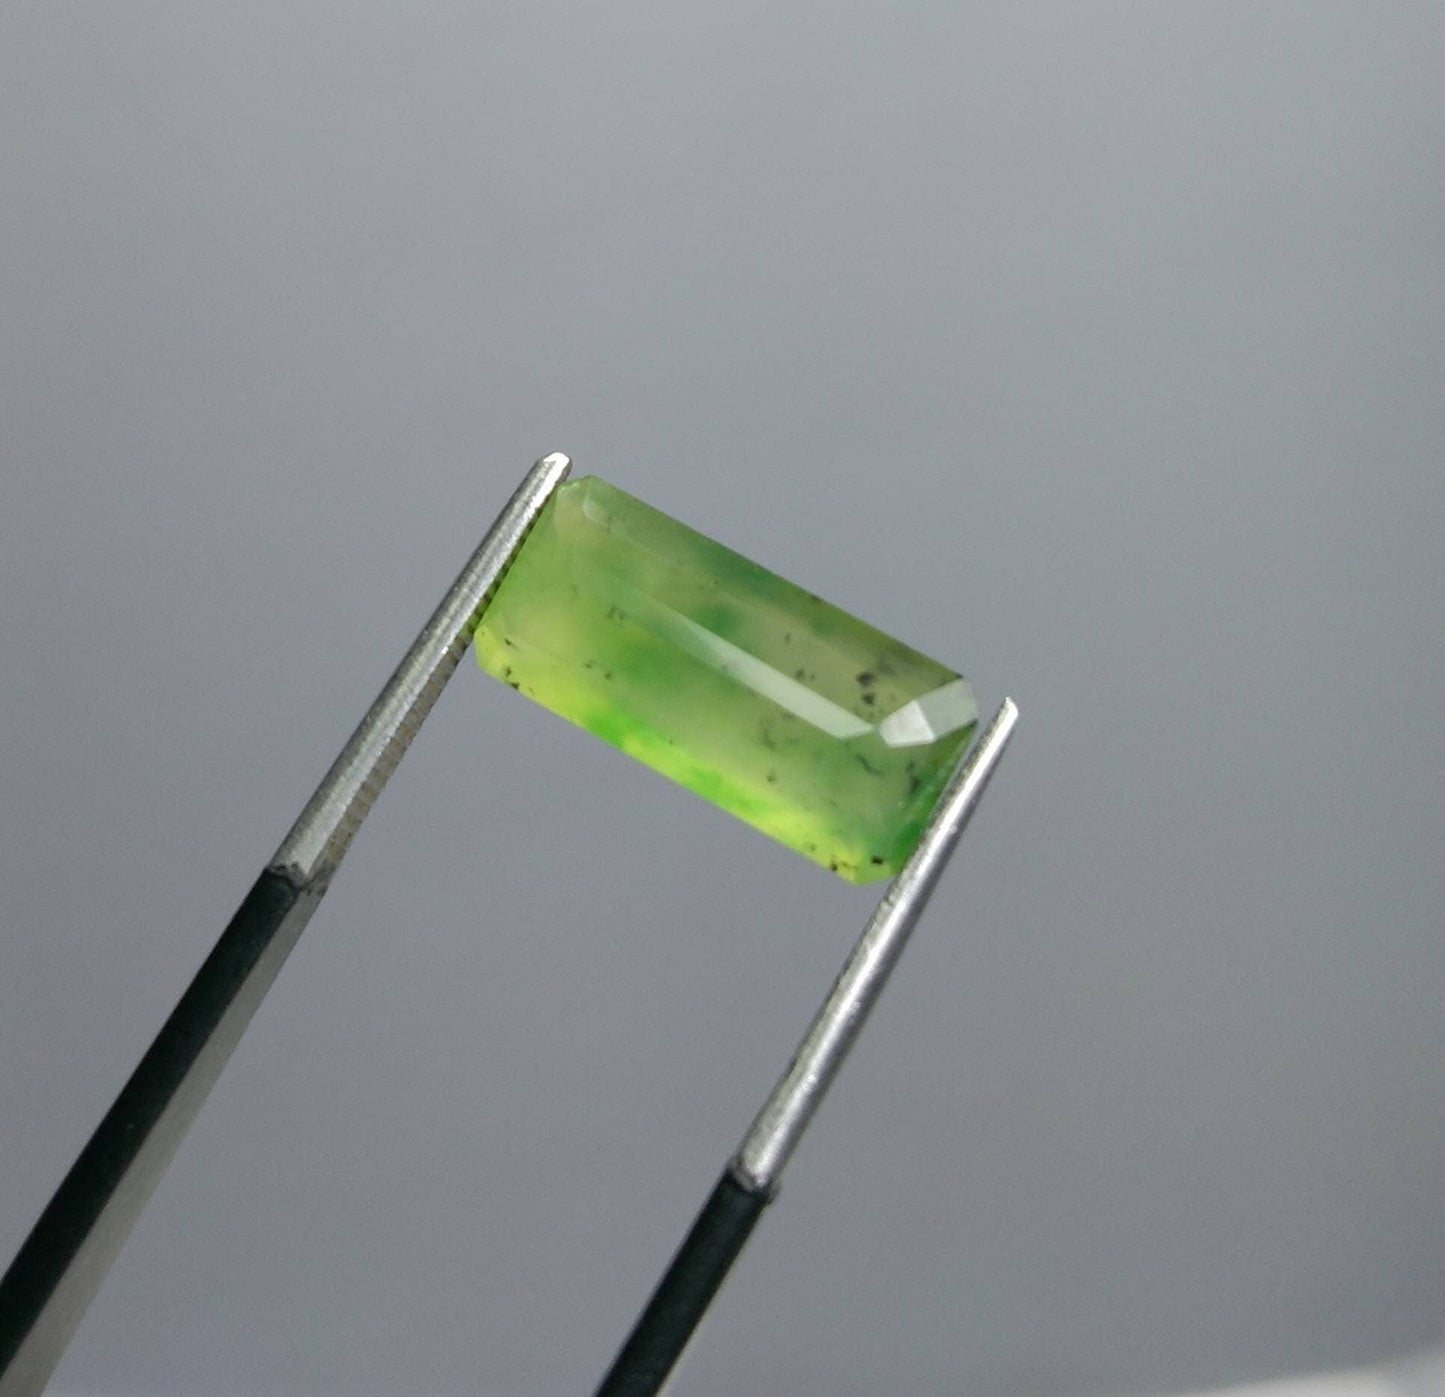 ARSAA GEMS AND MINERALSNatural top quality beautiful 4 carats radiant shape green faceted hydrograssular garnet gem - Premium  from ARSAA GEMS AND MINERALS - Just $12.00! Shop now at ARSAA GEMS AND MINERALS